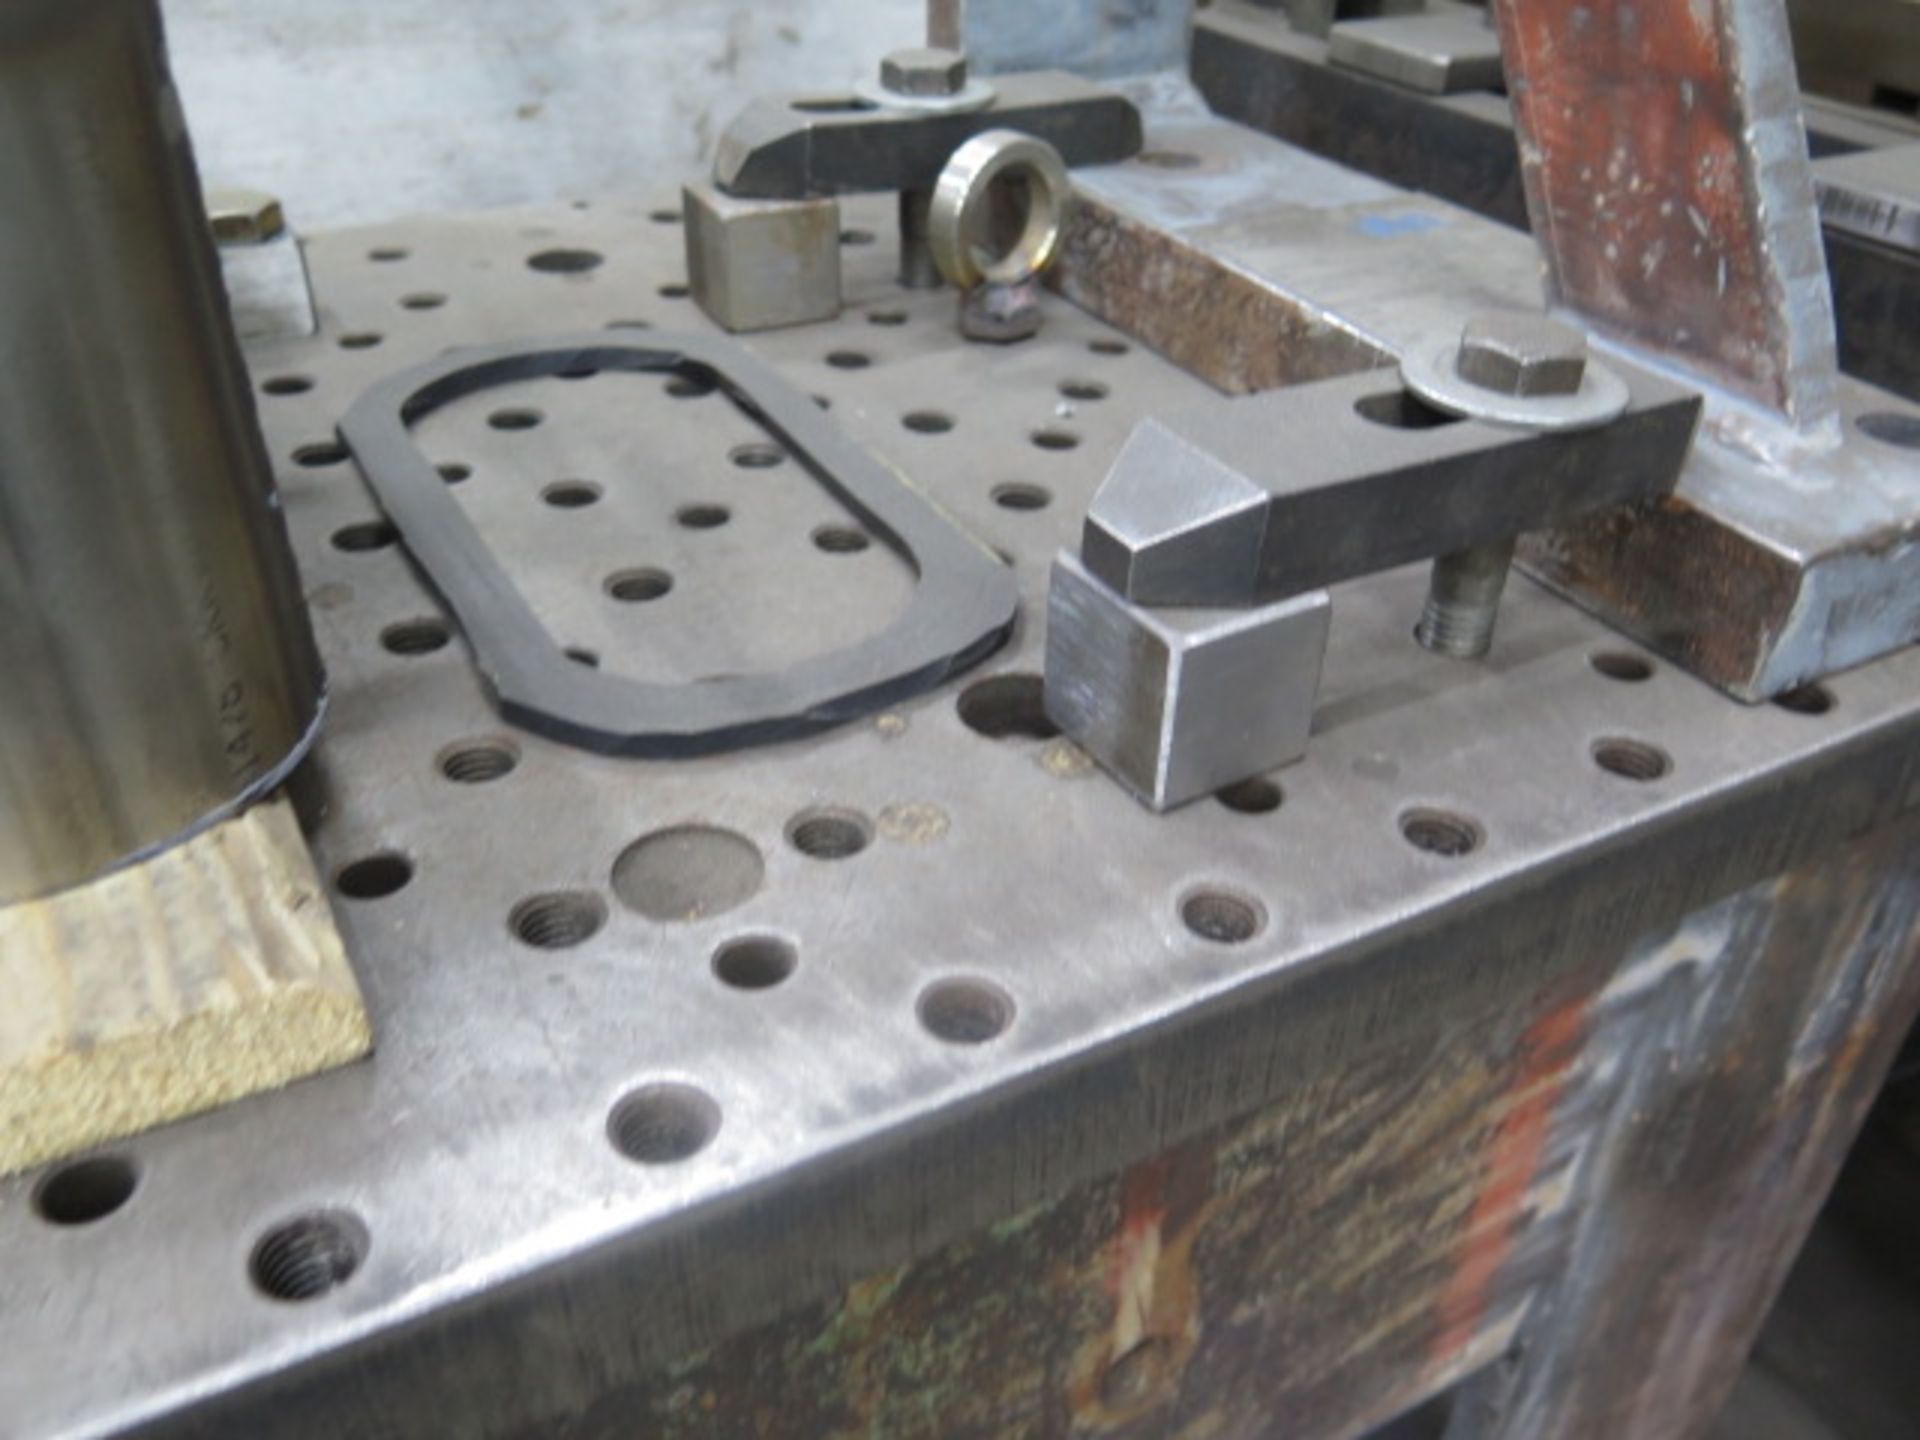 18” x 47” Tapped-Hole Fabrication Table w/ Angle Plates (SOLD AS-IS - NO WARRANTY) - Image 4 of 6